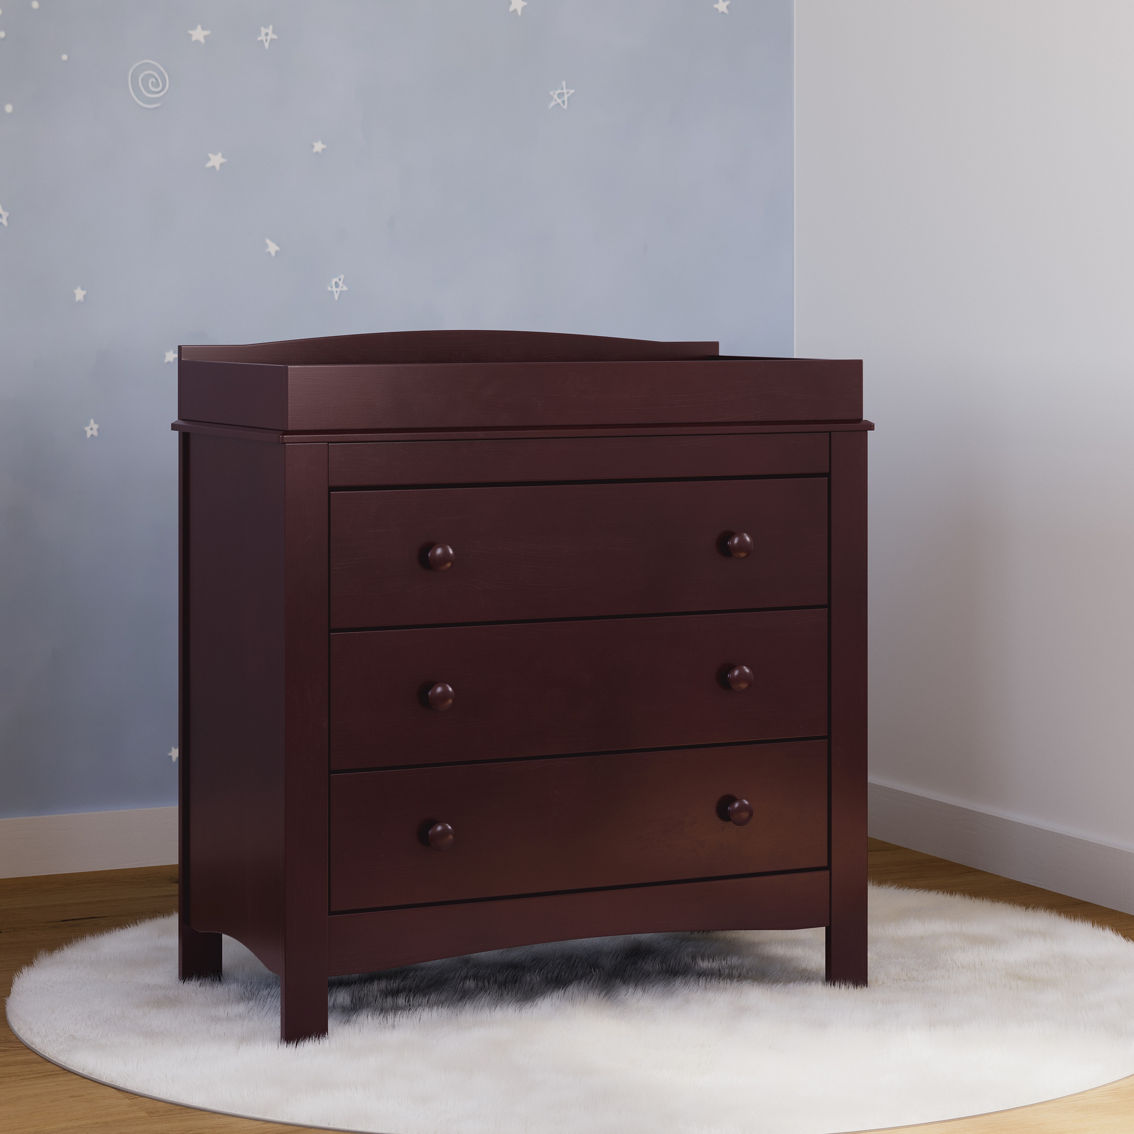 Graco Noah 3 Drawer Chest with Changing Topper - Image 4 of 4